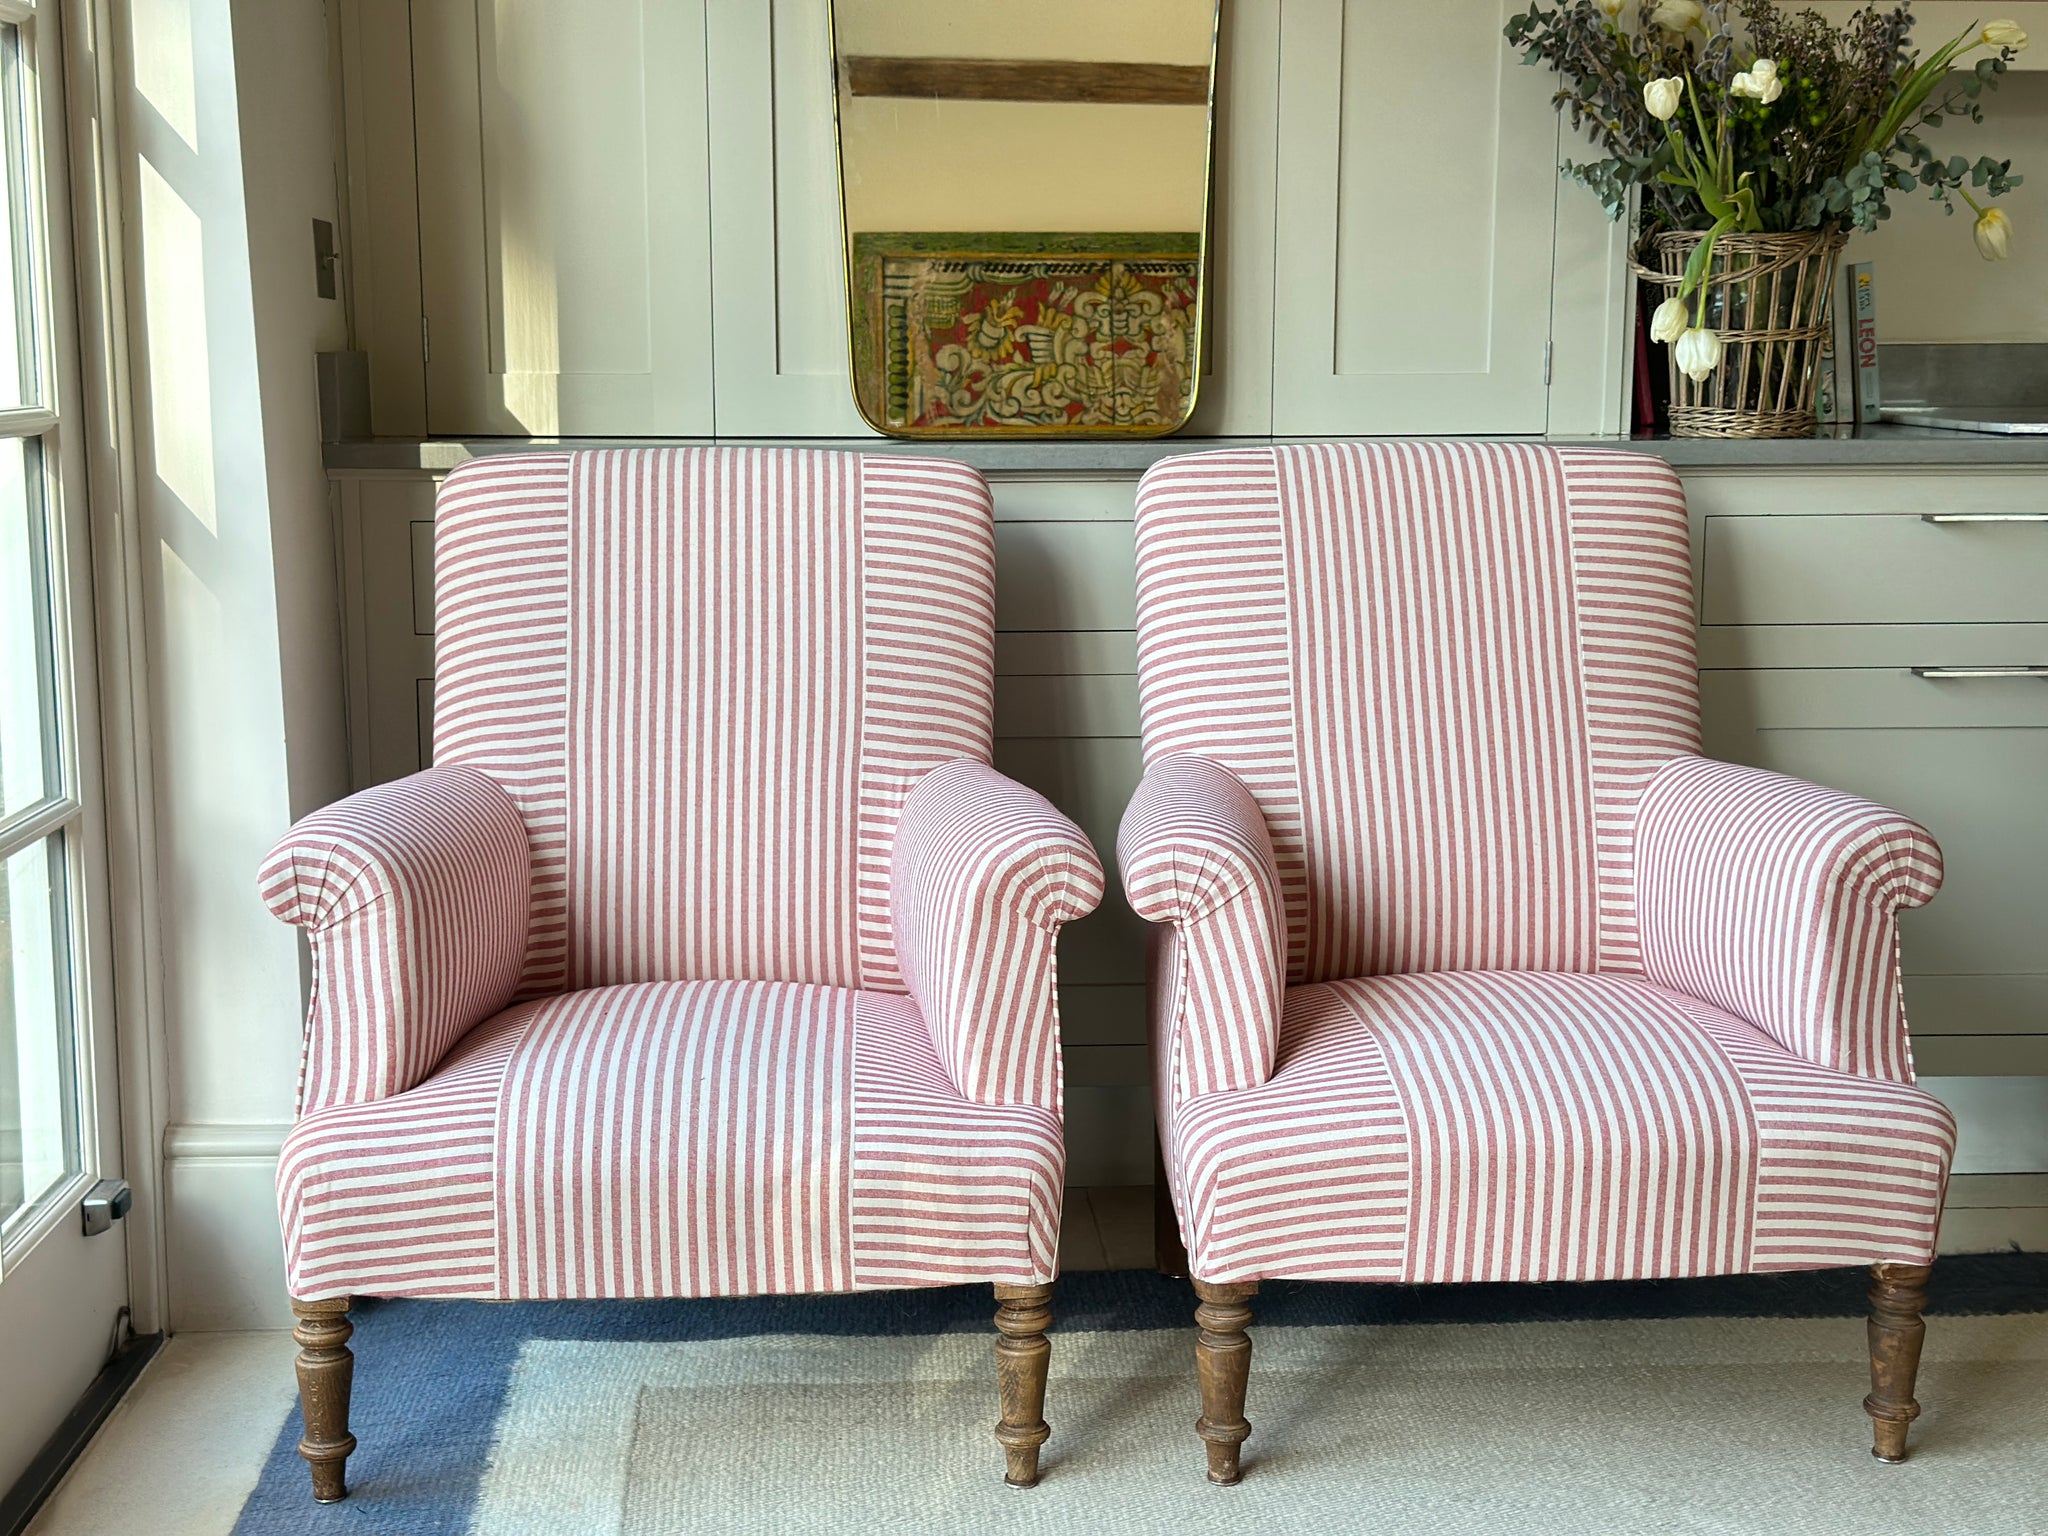 Pair of Nap III Square Back Chairs in Red and White